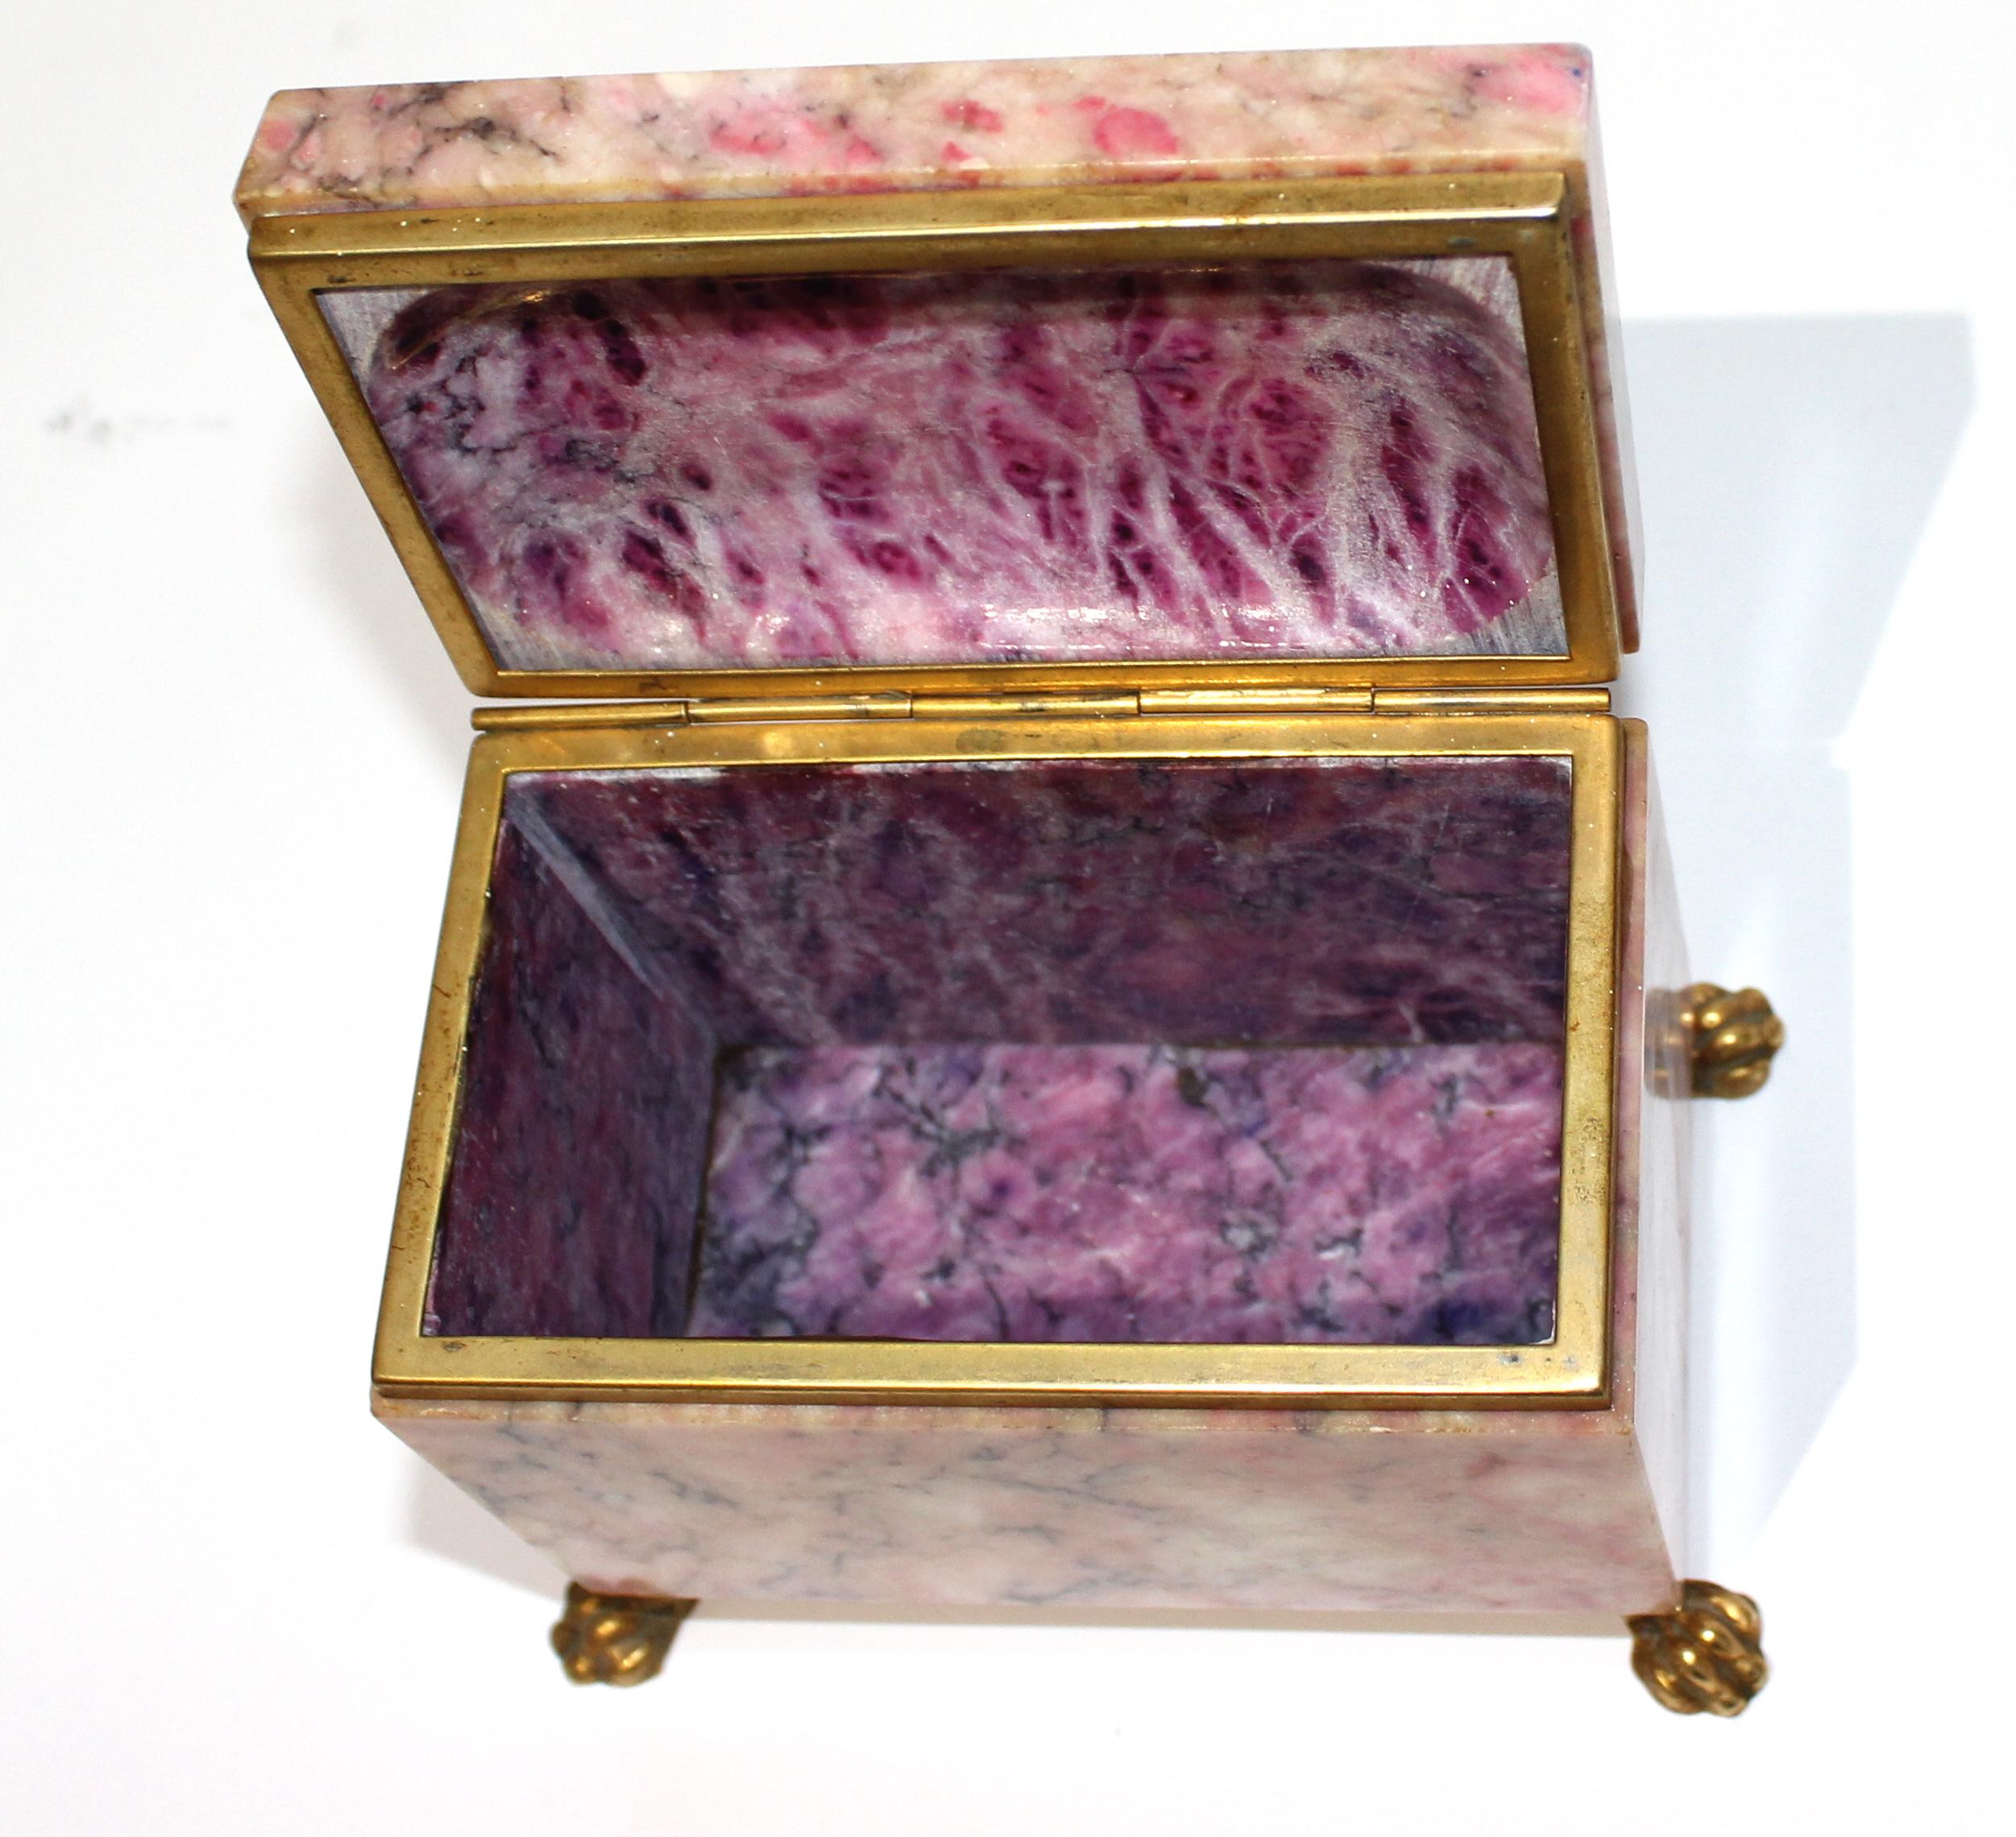 Antique jewelry casket with gold dore accent - ouside shades of pink, inside the stone-like material is scooped out on top, inlaid inside, and in shades of purple lilac.

Size of the box itself: 4